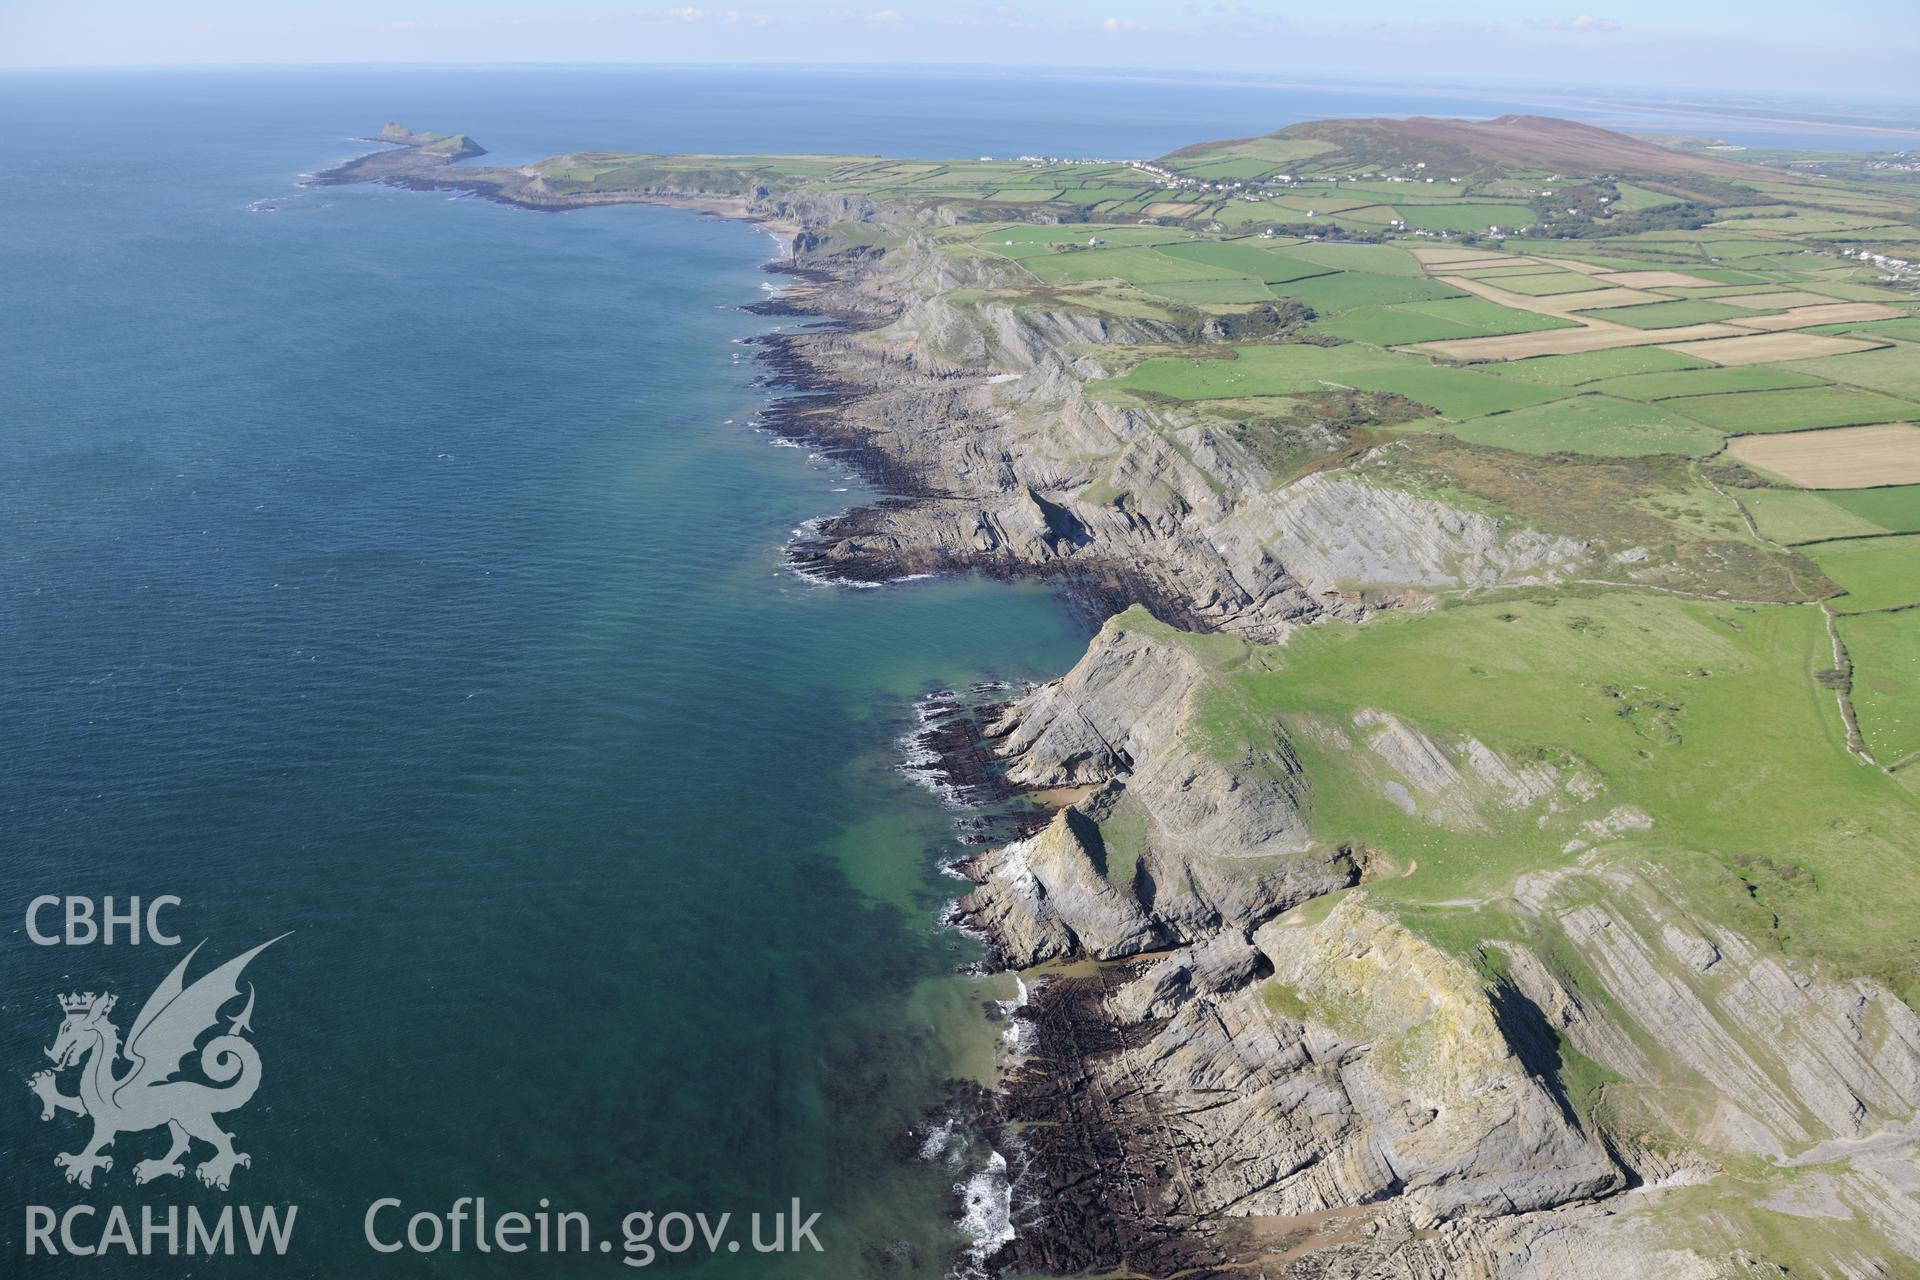 Horse Cliff promontory fort, Yellow Top fort & in the distance, Worm's Head, on south western shore of Gower Peninsula. Oblique aerial photograph taken during Royal Commission?s programme of archaeological aerial reconnaissance by Toby Driver, 30/09/2015.